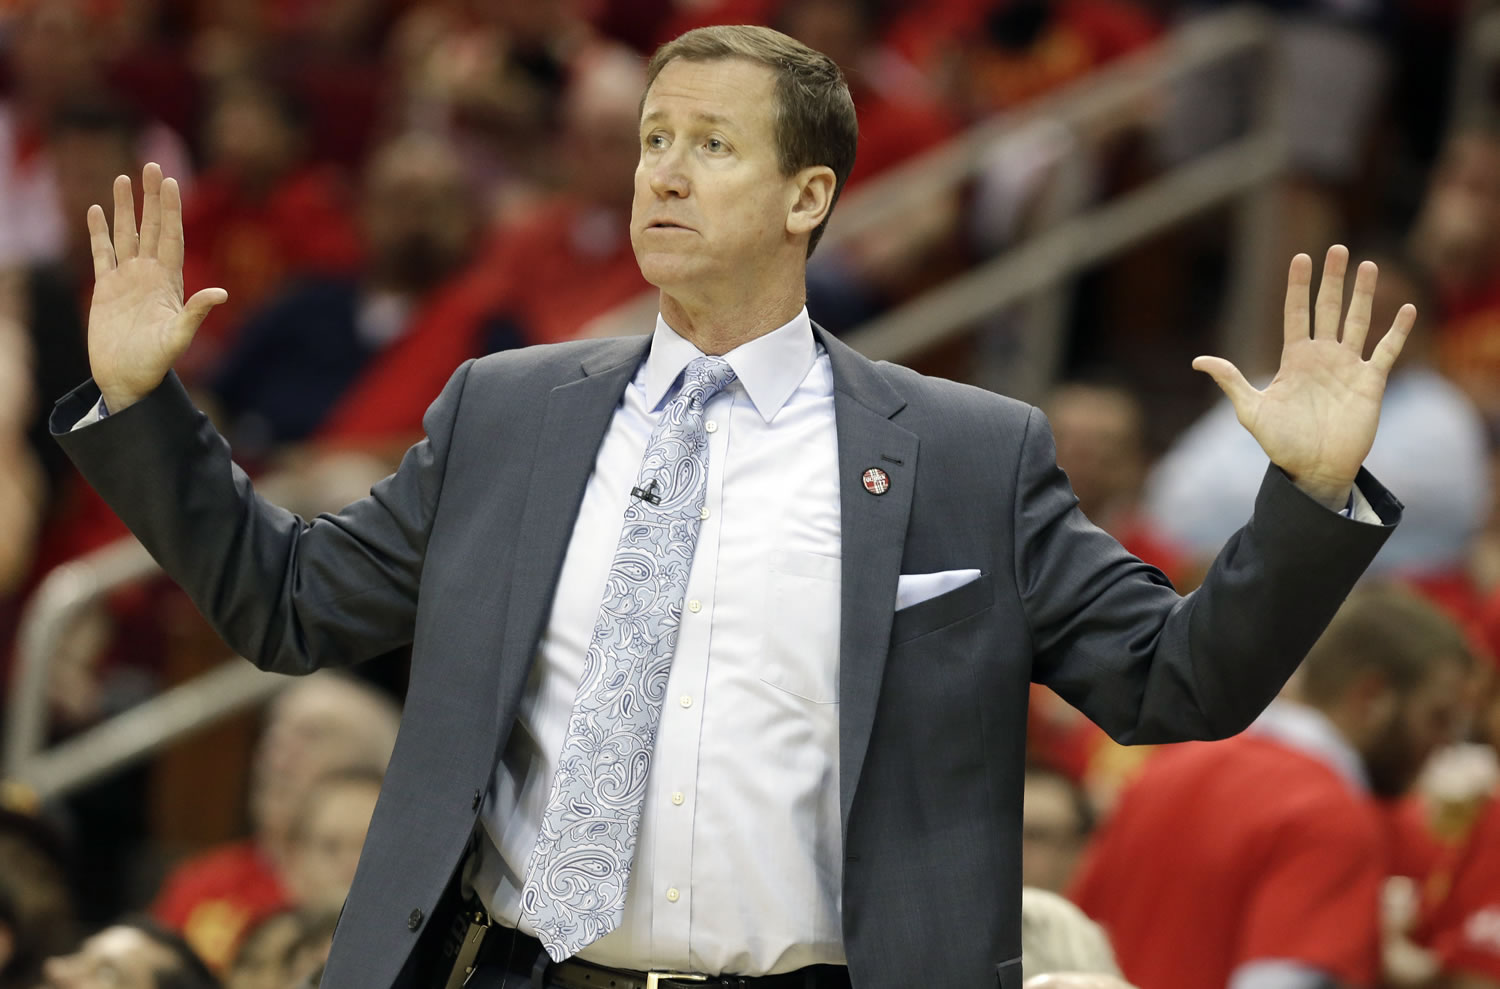 On the flight back from Houston, Blazers coach Terry Stotts watched a bit of Game 6 of the 1977 NBA Finals.